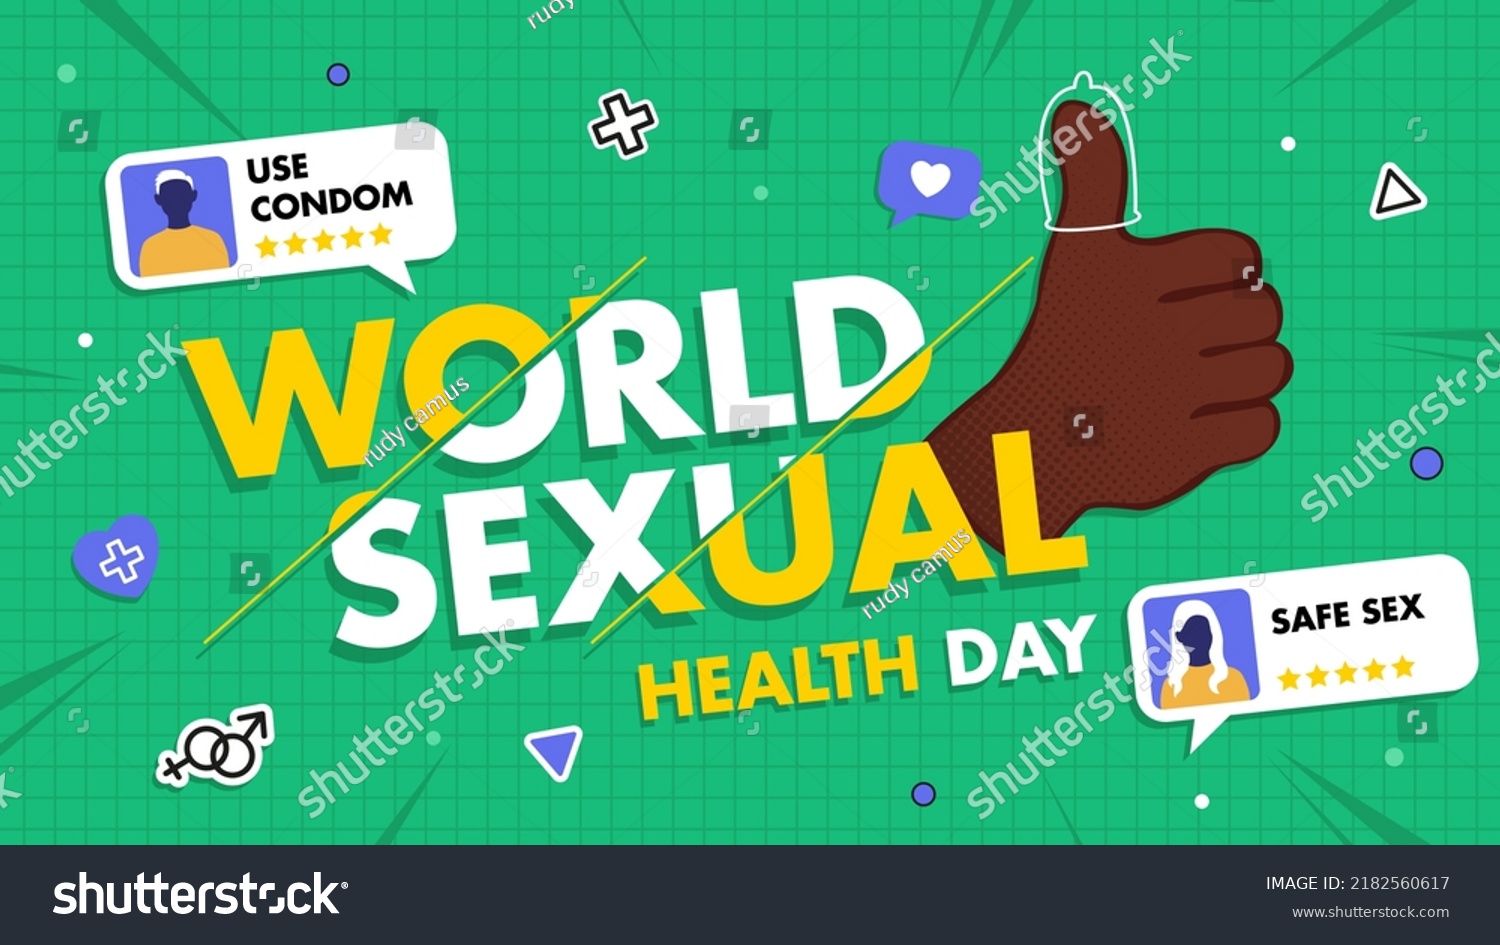 World Sexual Health Day Banner Design Stock Vector Royalty Free 2182560617 Shutterstock 